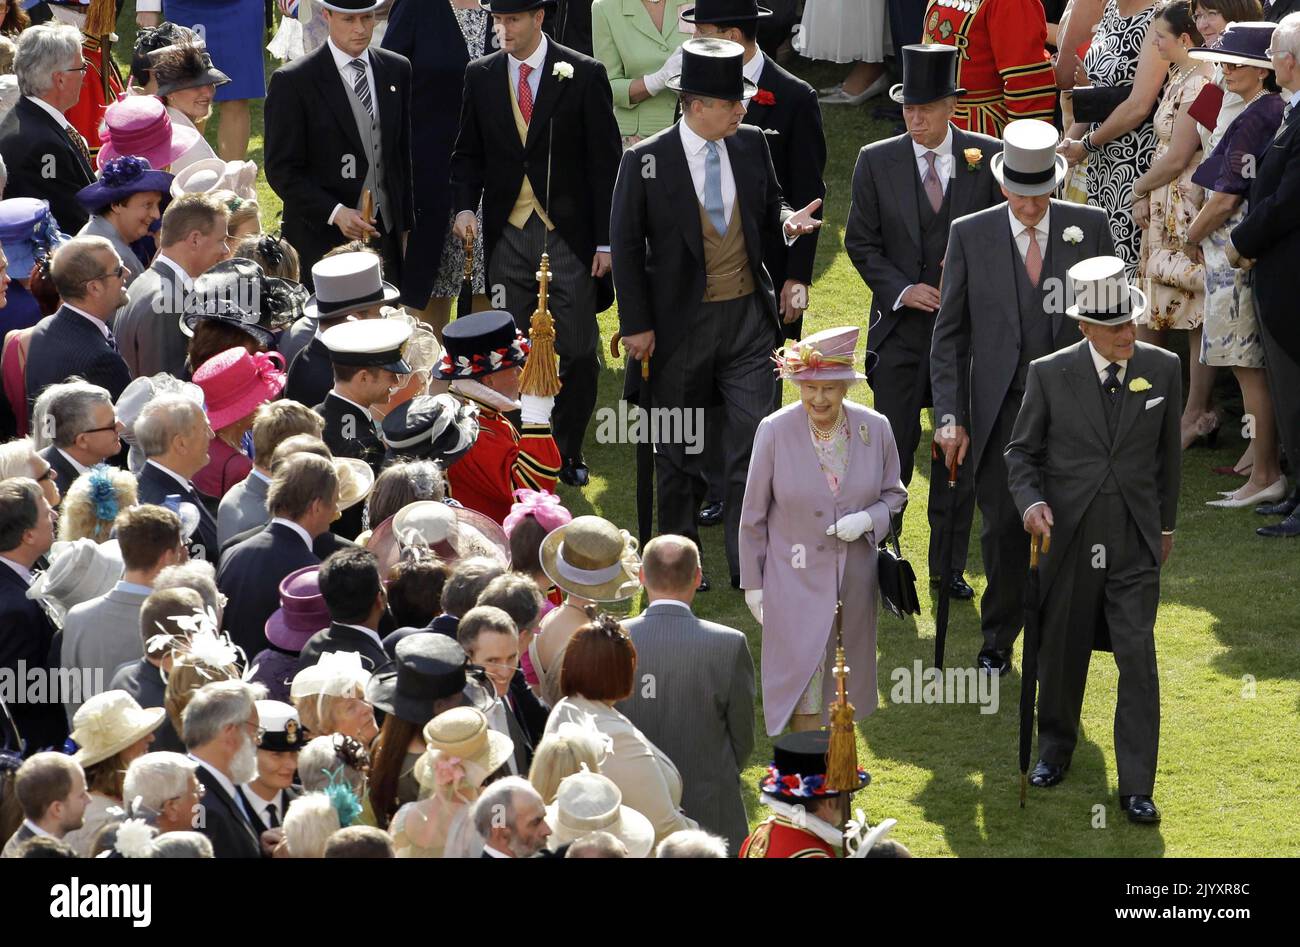 File photo dated 29/6/2011 of Queen Elizabeth II (second right in foreground) accompanied by the Duke of Edinburgh walking past guests at a royal garden party held in the grounds of Buckingham Palace, London. Approximately 1.45 million people have attended a garden party at Buckingham Palace or the Palace of Holyroodhouse since 1952. Issue date: Thursday September 8, 2022. Stock Photo